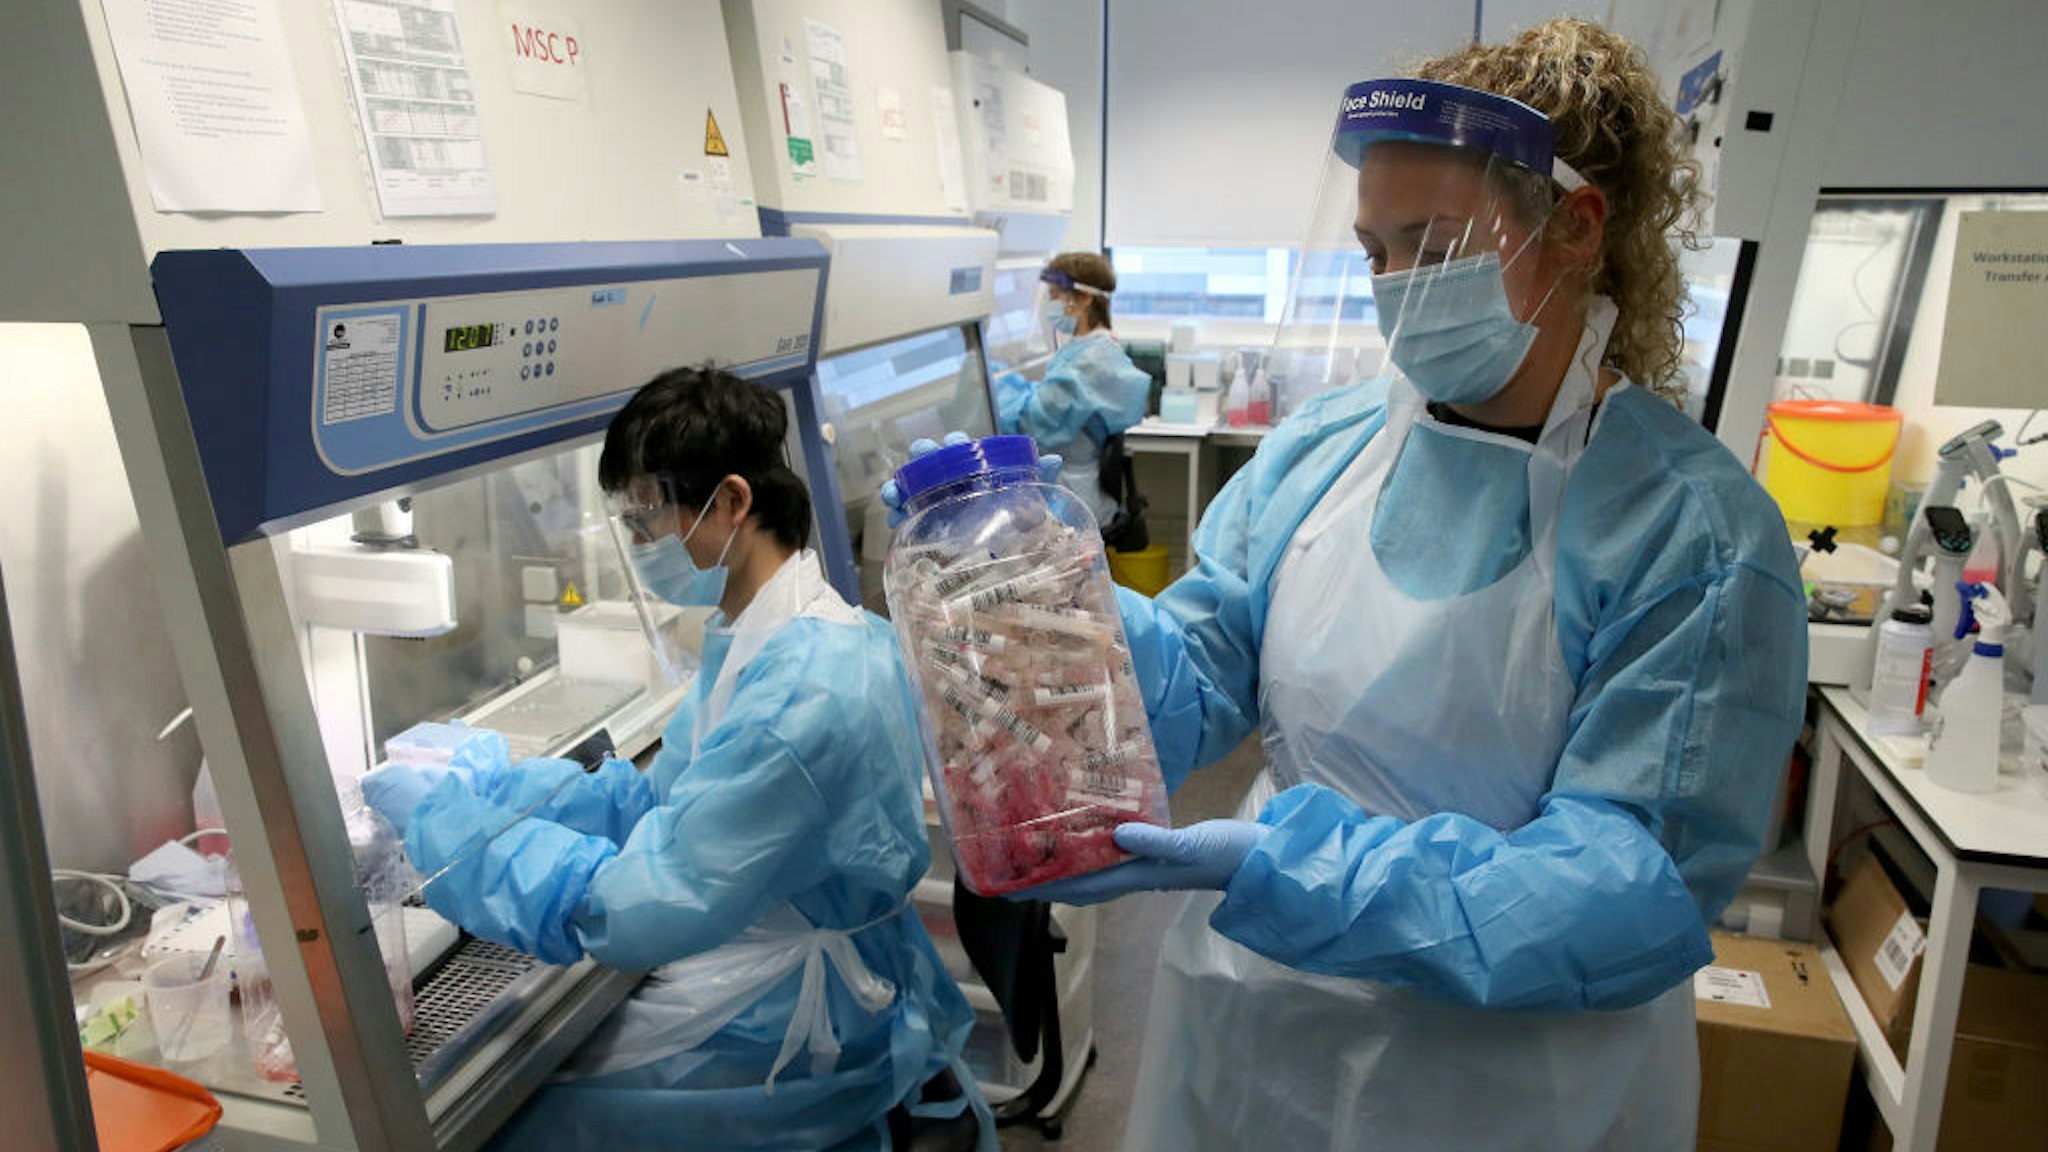 A Scientist holds samples ahead of them being discarded whilst working at the Lighthouse Laboratory at the Queen Elizabeth University Hospital in Glasgow which receives and analyses coronavirus swabs with suspected COVID-19 infections in the continuing fight against the coronavirus. Scotland continues in phase one of the Scottish Government's plan for gradually lifting lockdown. (Photo by Andrew Milligan/PA Images via Getty Images)